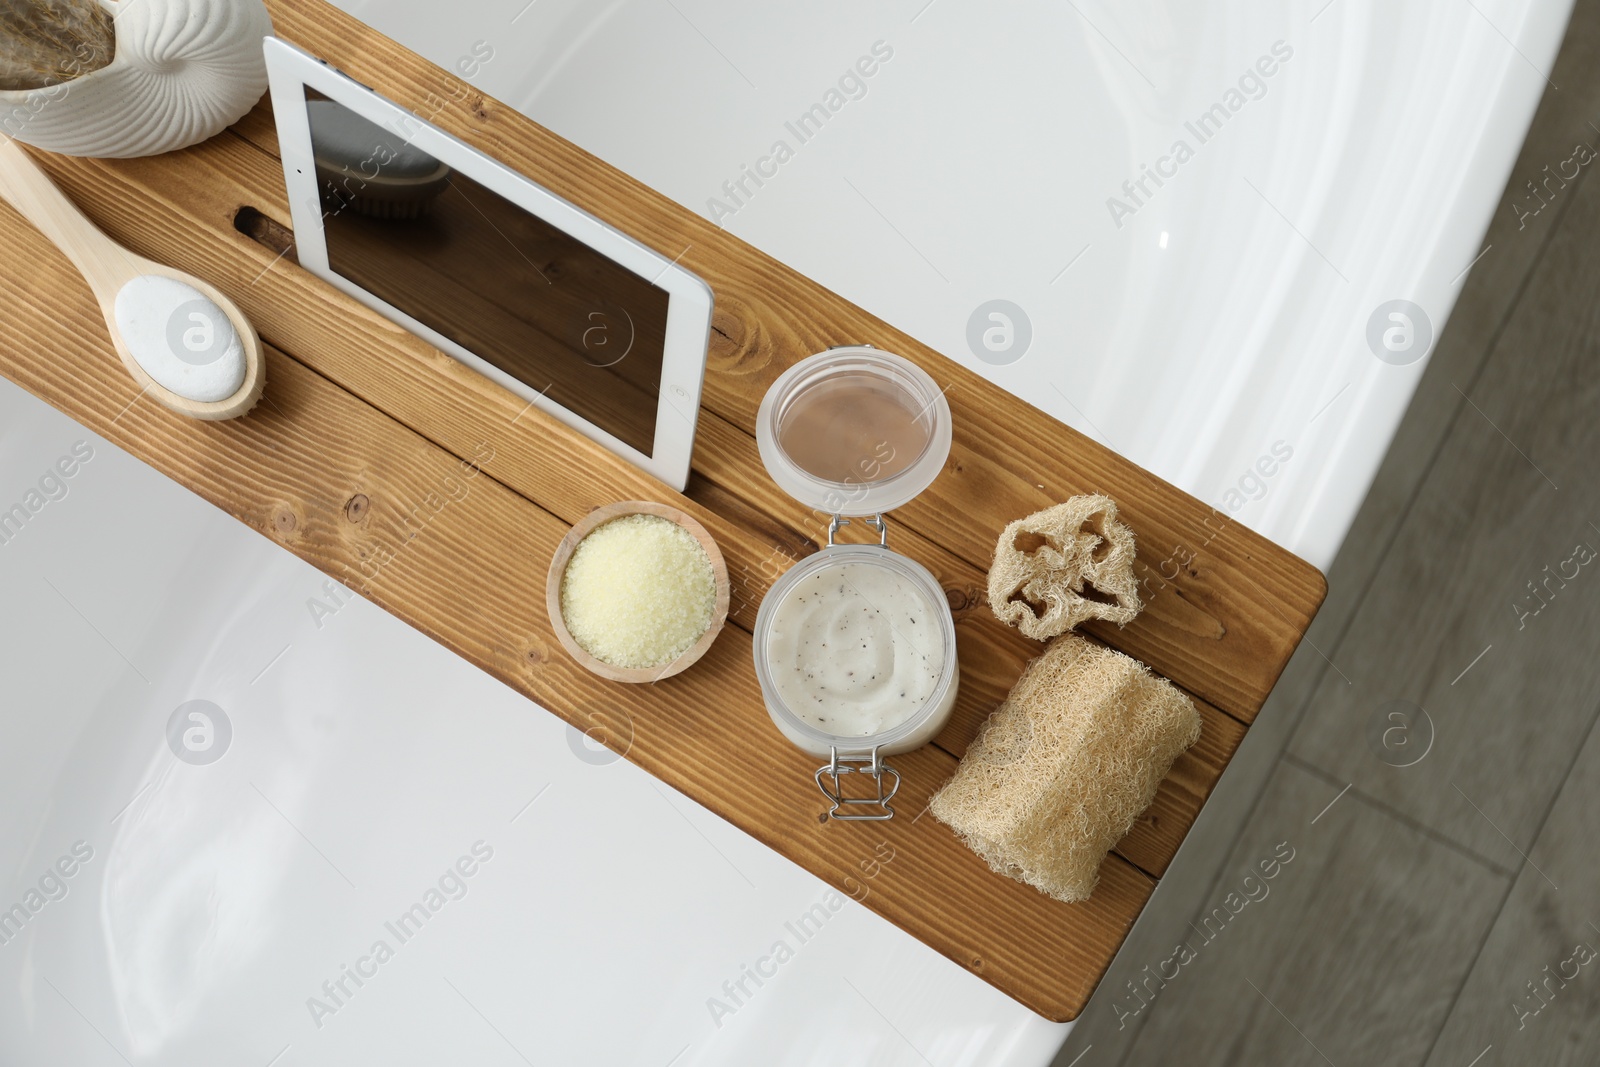 Photo of Wooden tray with tablet and spa products on bath tub in bathroom, top view